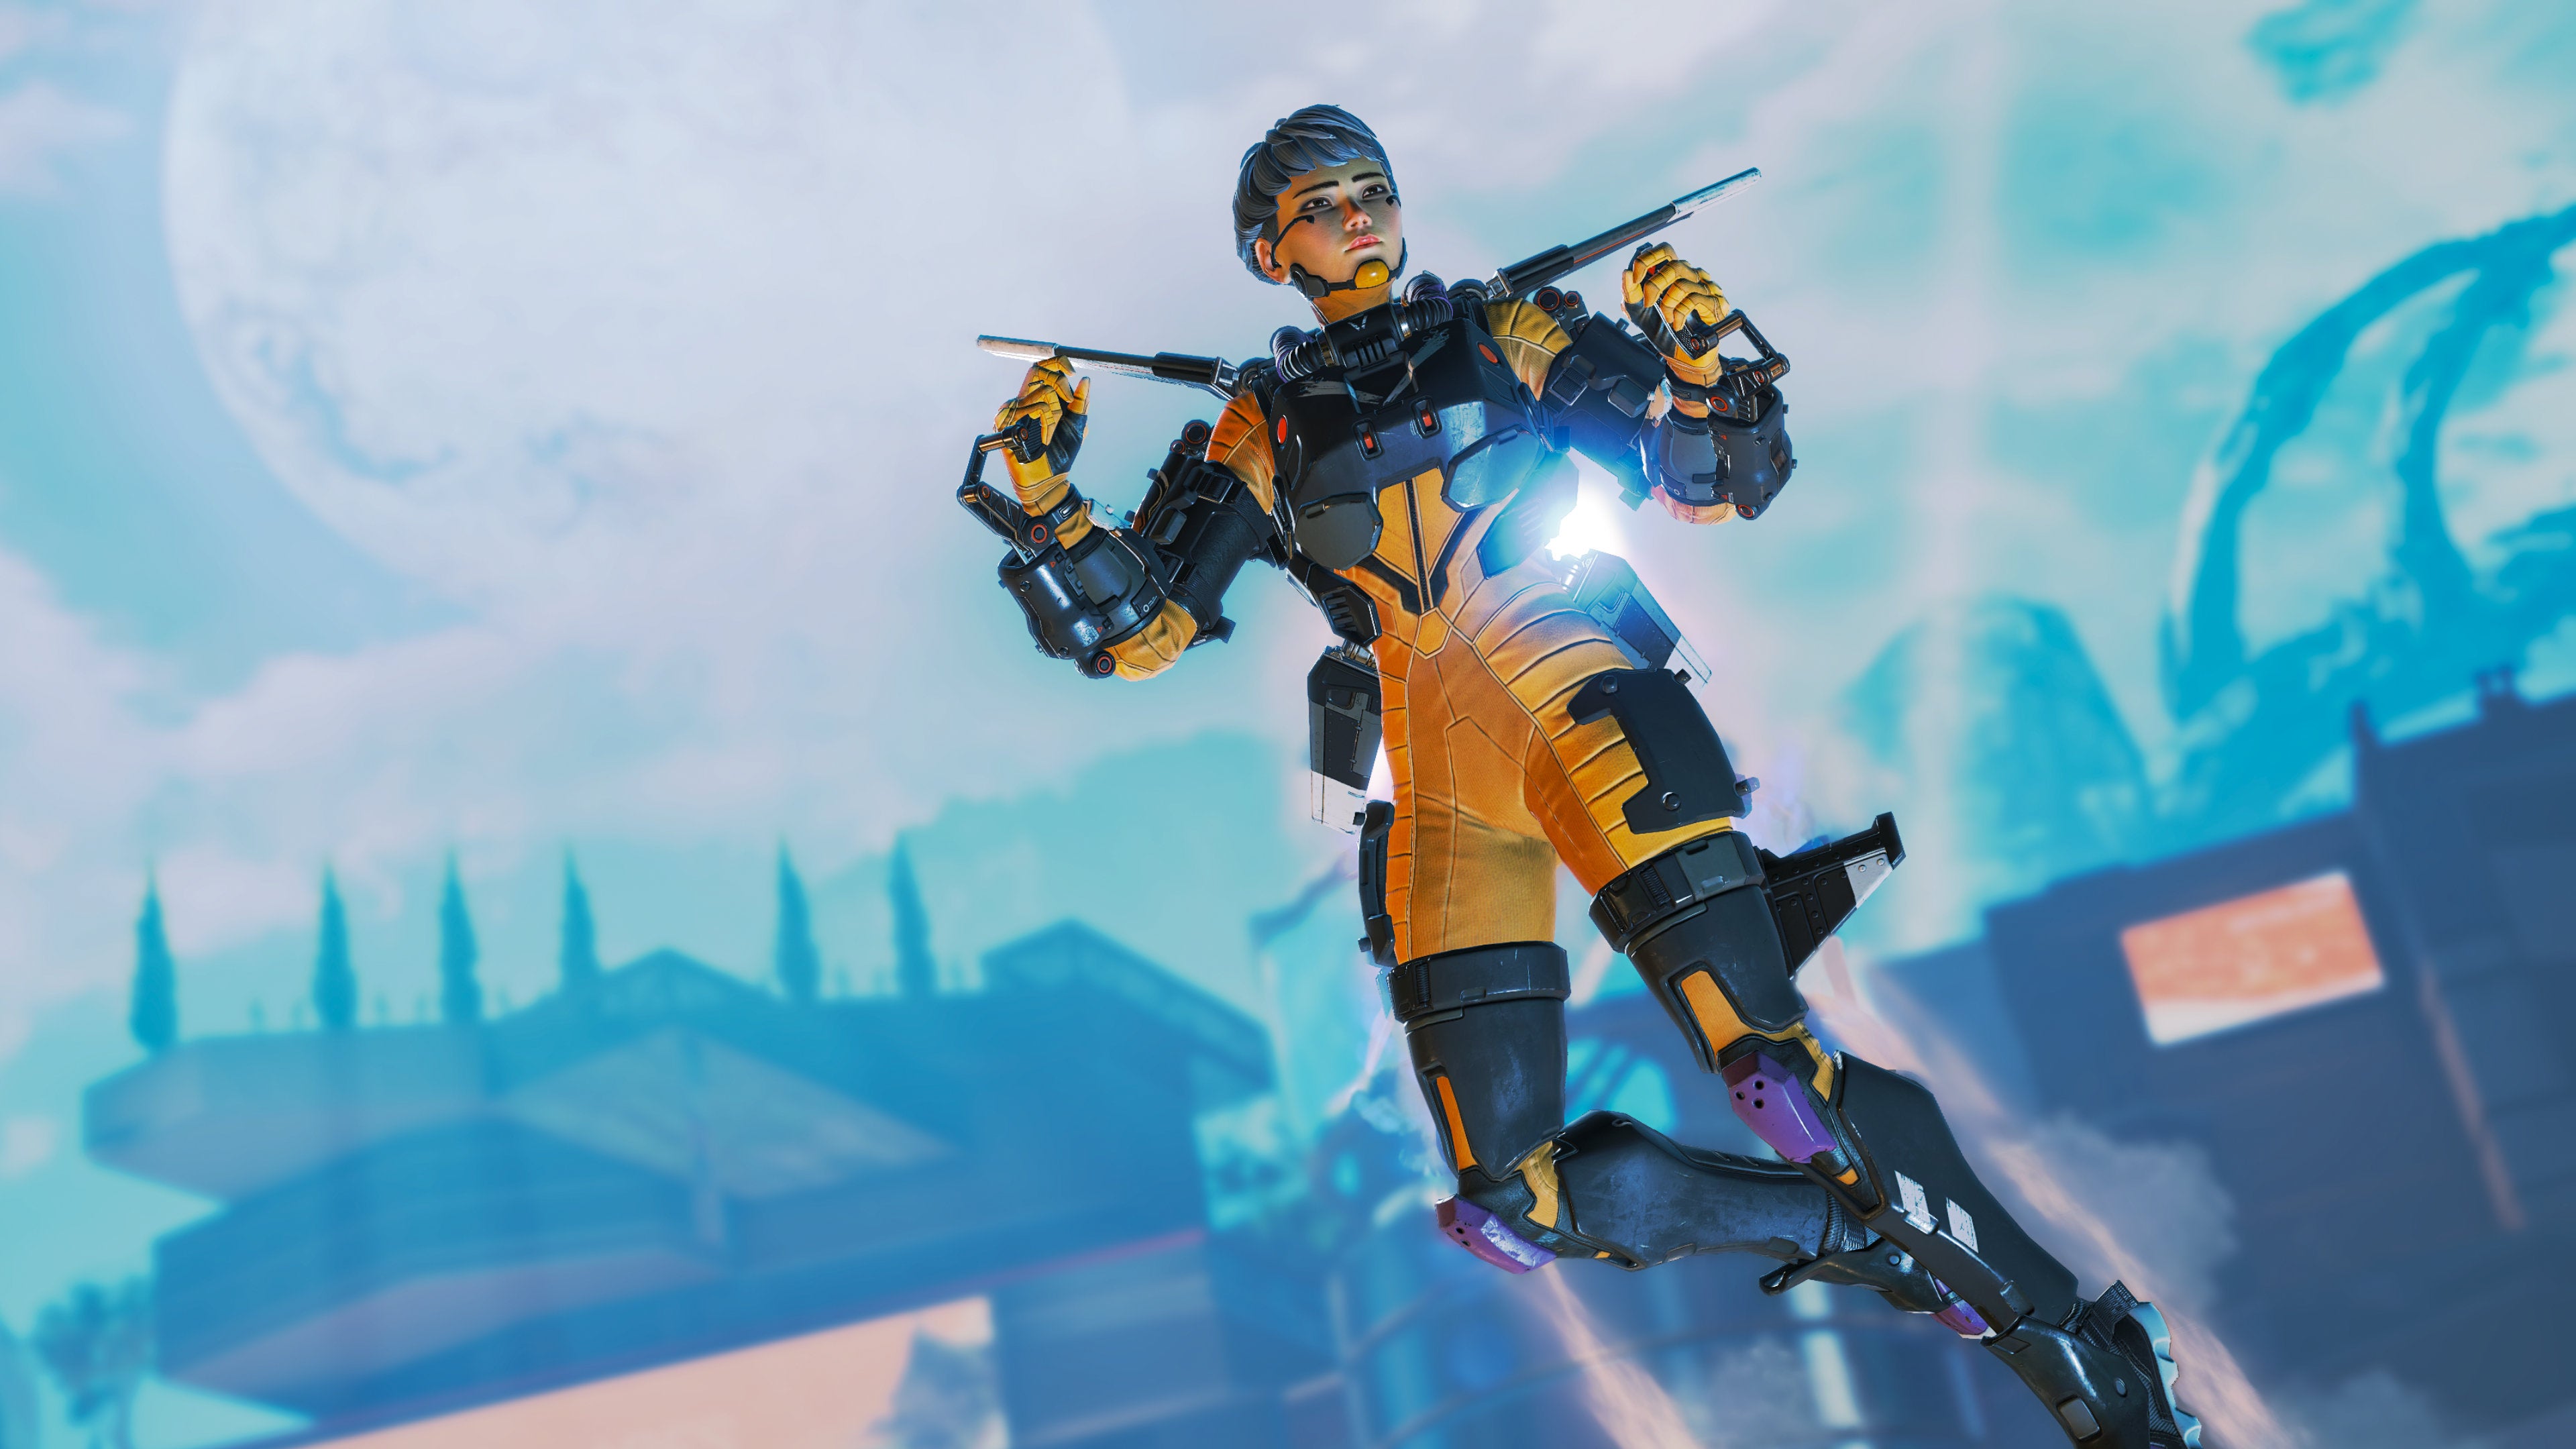 Apex Legends Valkyrie abilities and tips | Rock Paper Shotgun